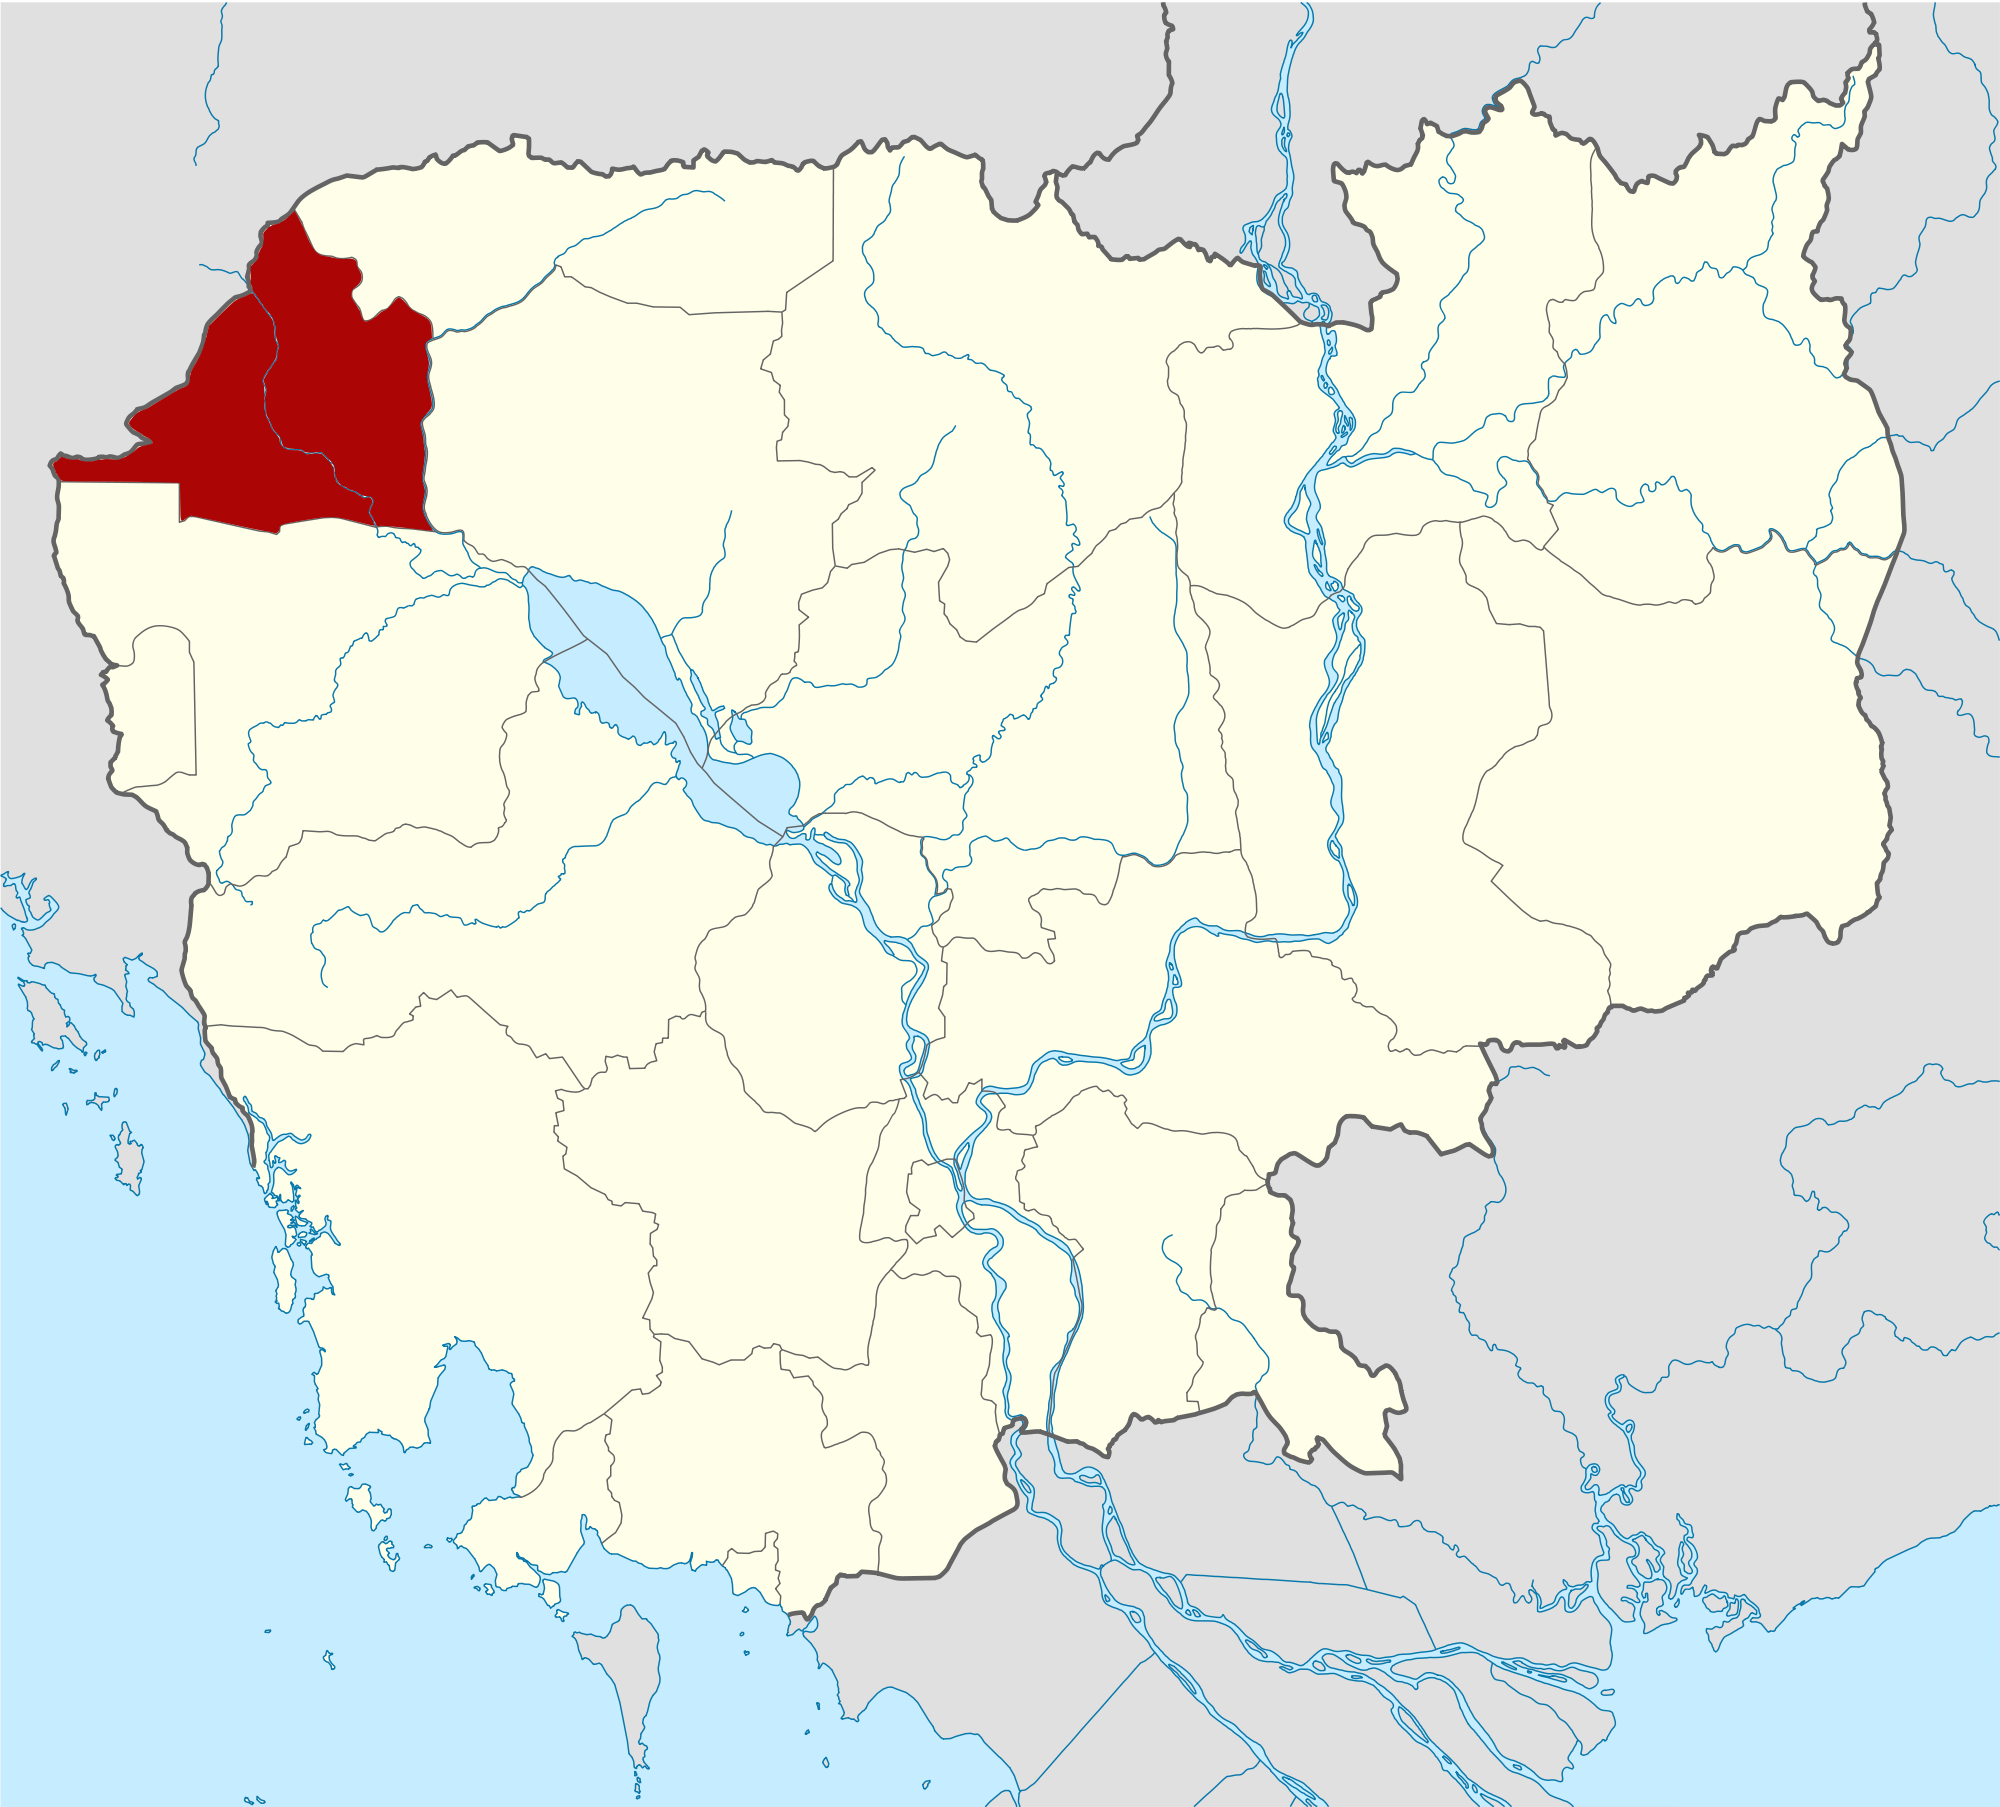 Poipet shown on Cambodia map